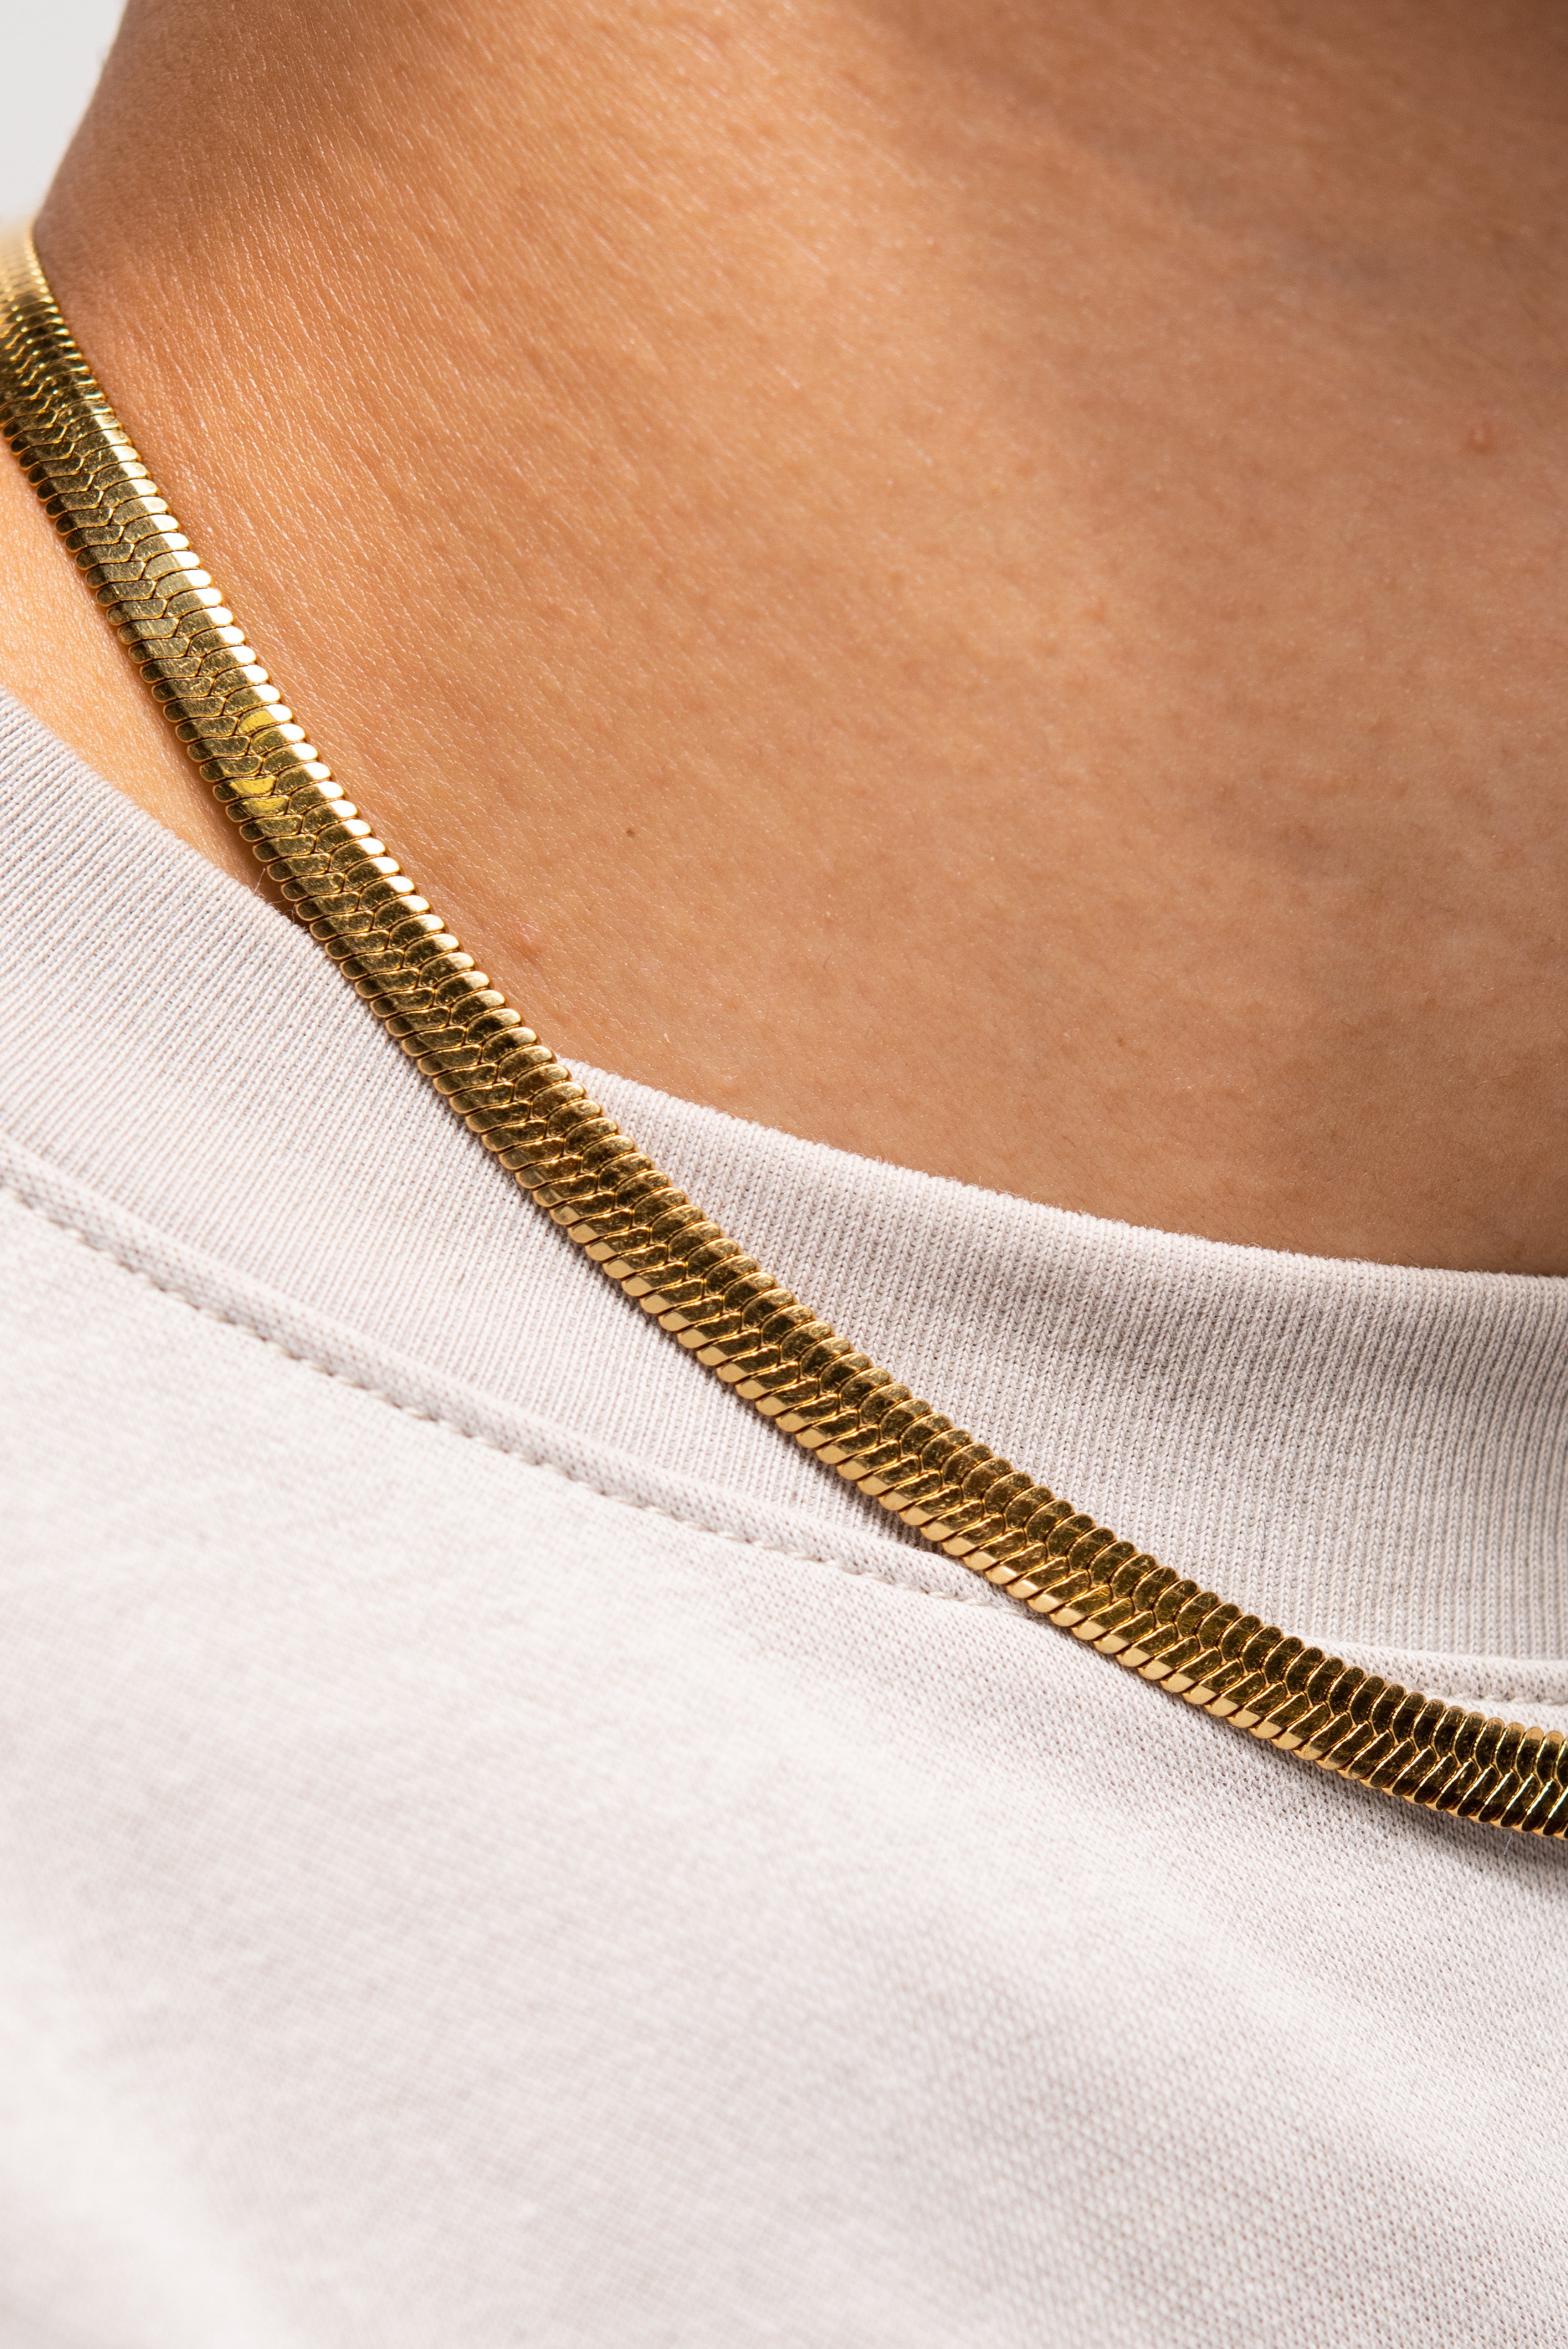 Mens 14K Gold Plated Herringbone Chain Flat Hip Hop Necklace 20